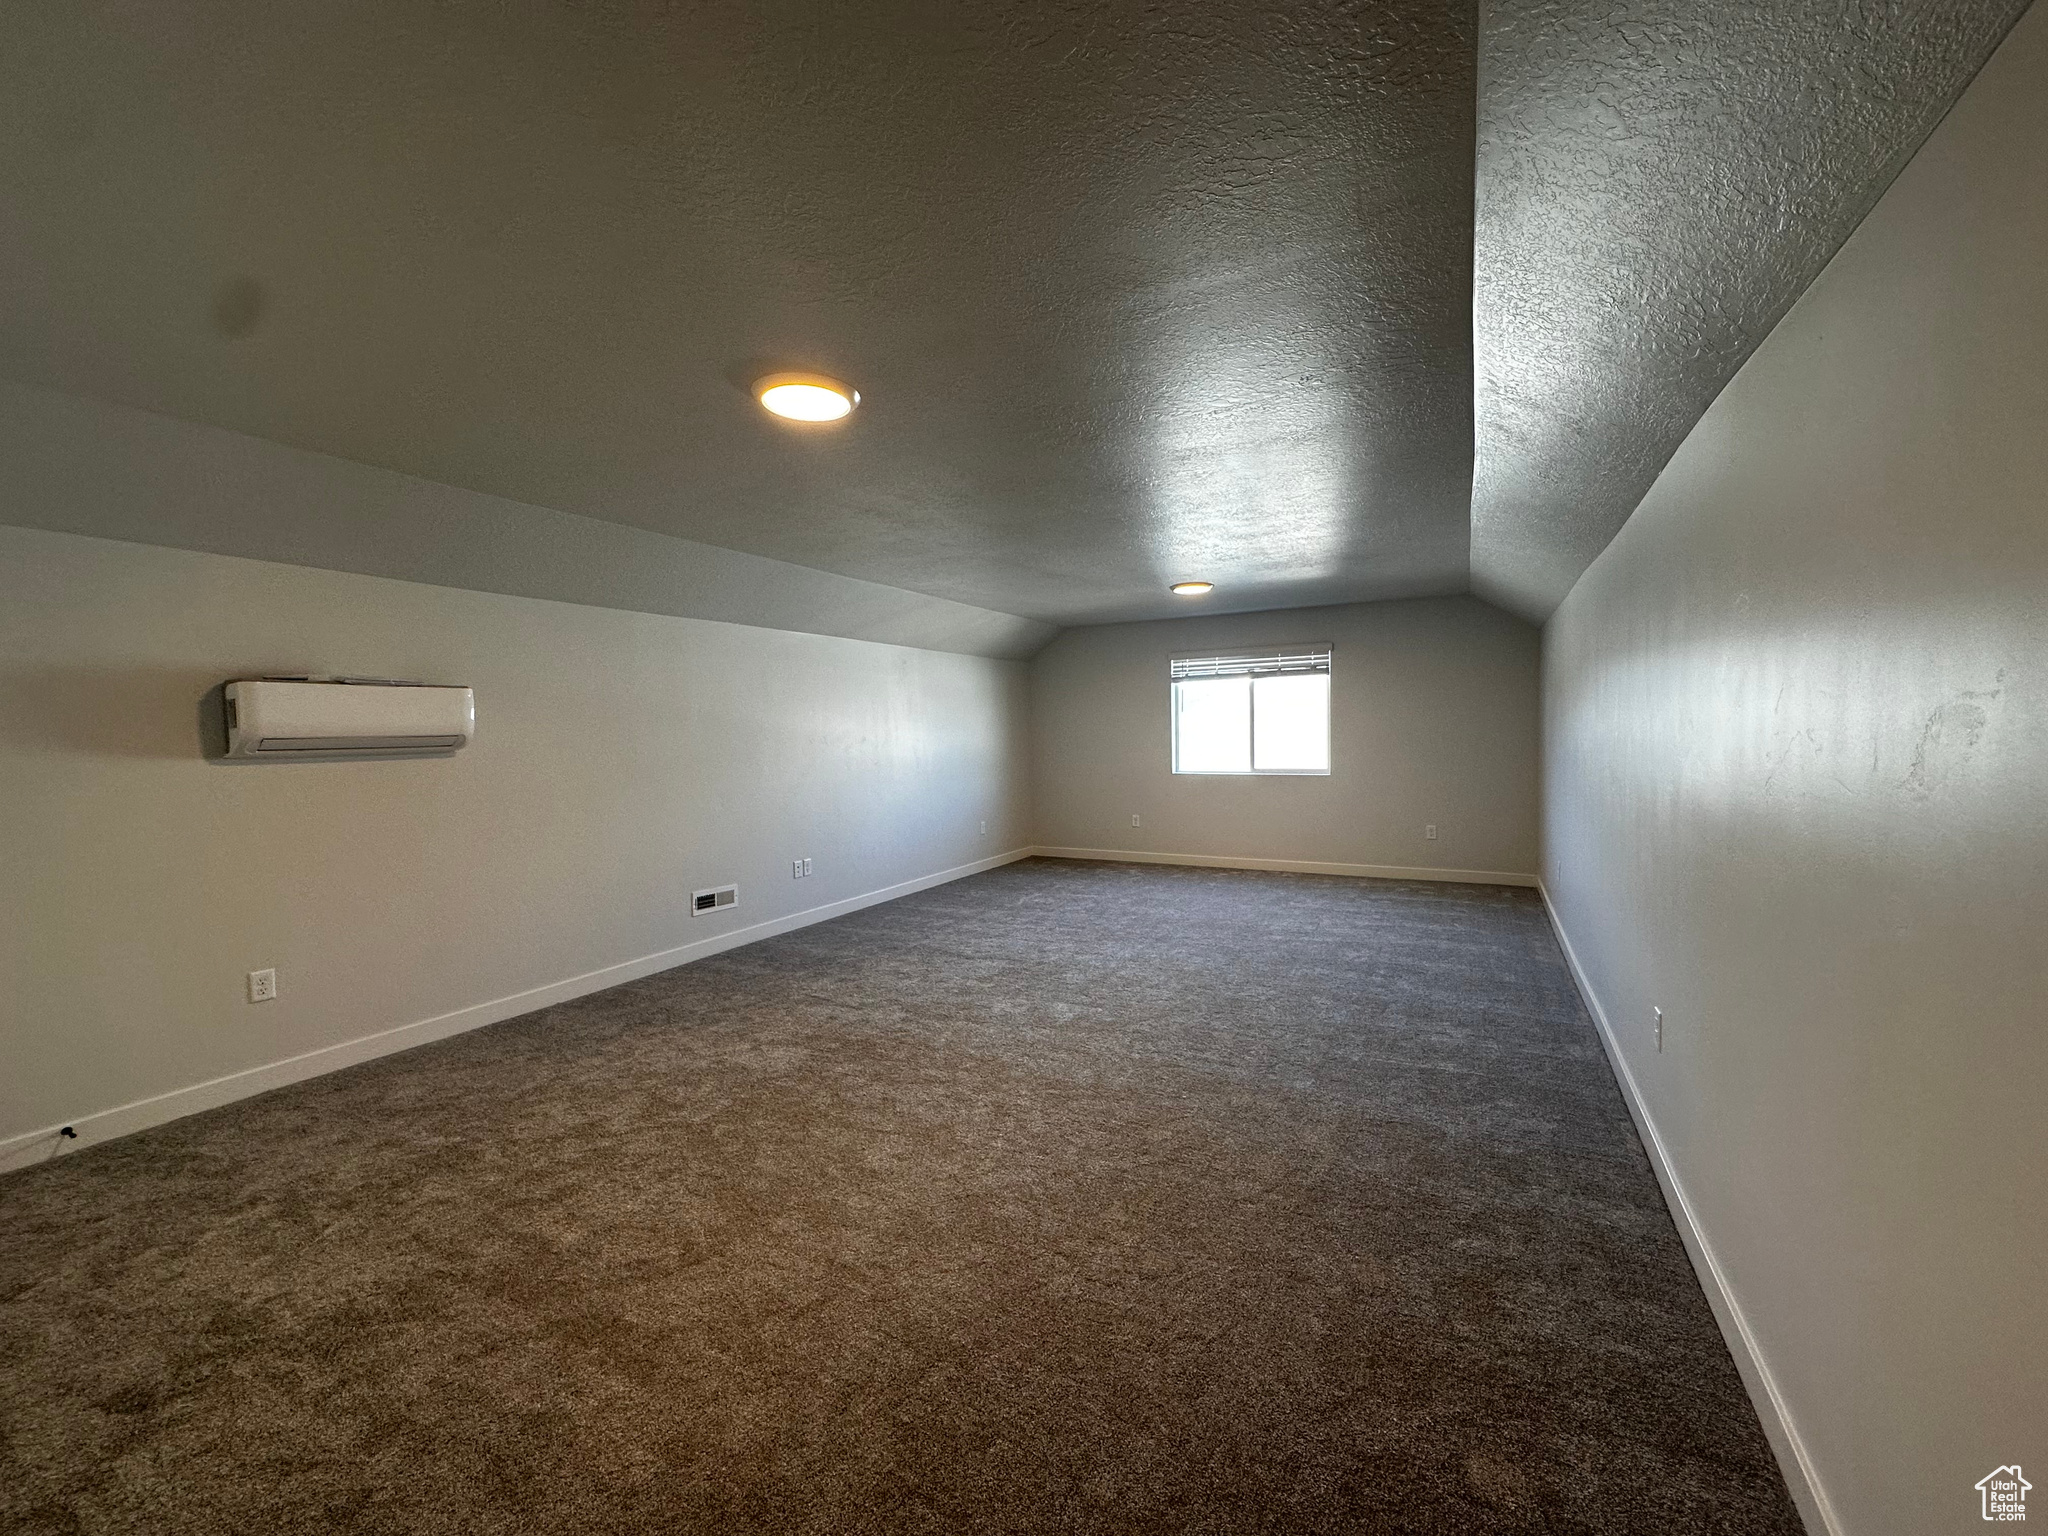 Additional living space with a textured ceiling, vaulted ceiling, an AC wall unit, and dark colored carpet